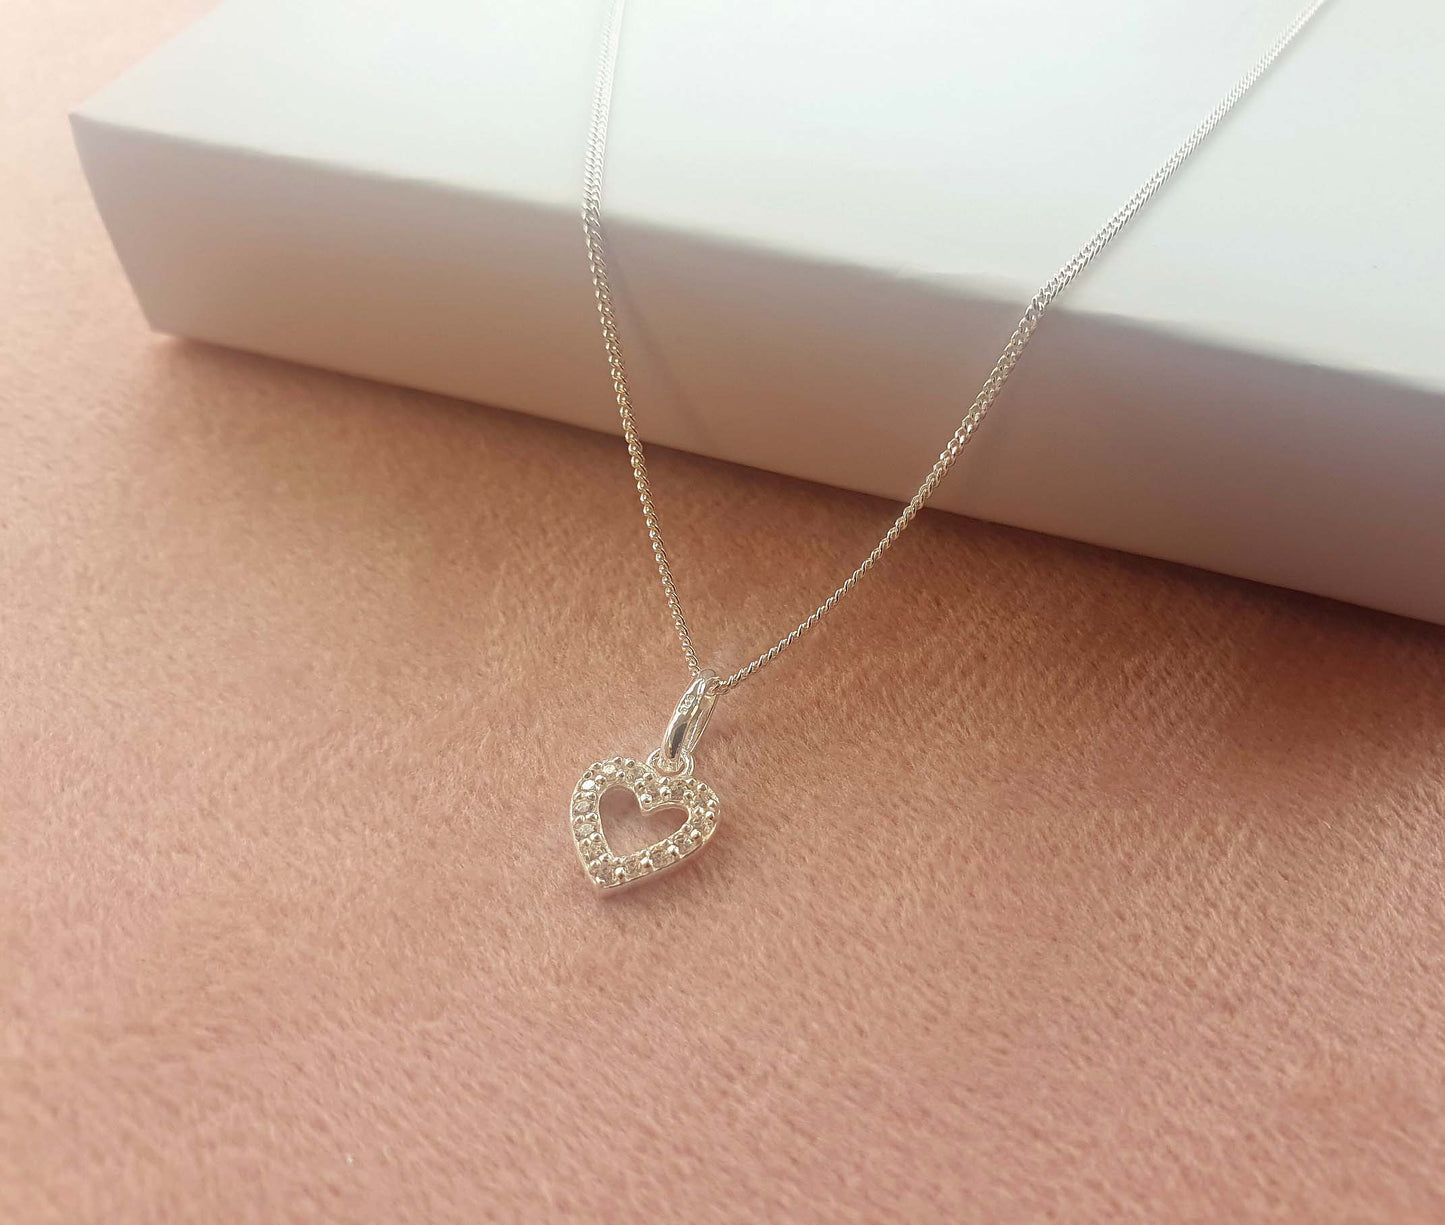 Grandma of the Bride Heart Necklace with Cubic Zirconia in Sterling Silver 925, Personalised Gift